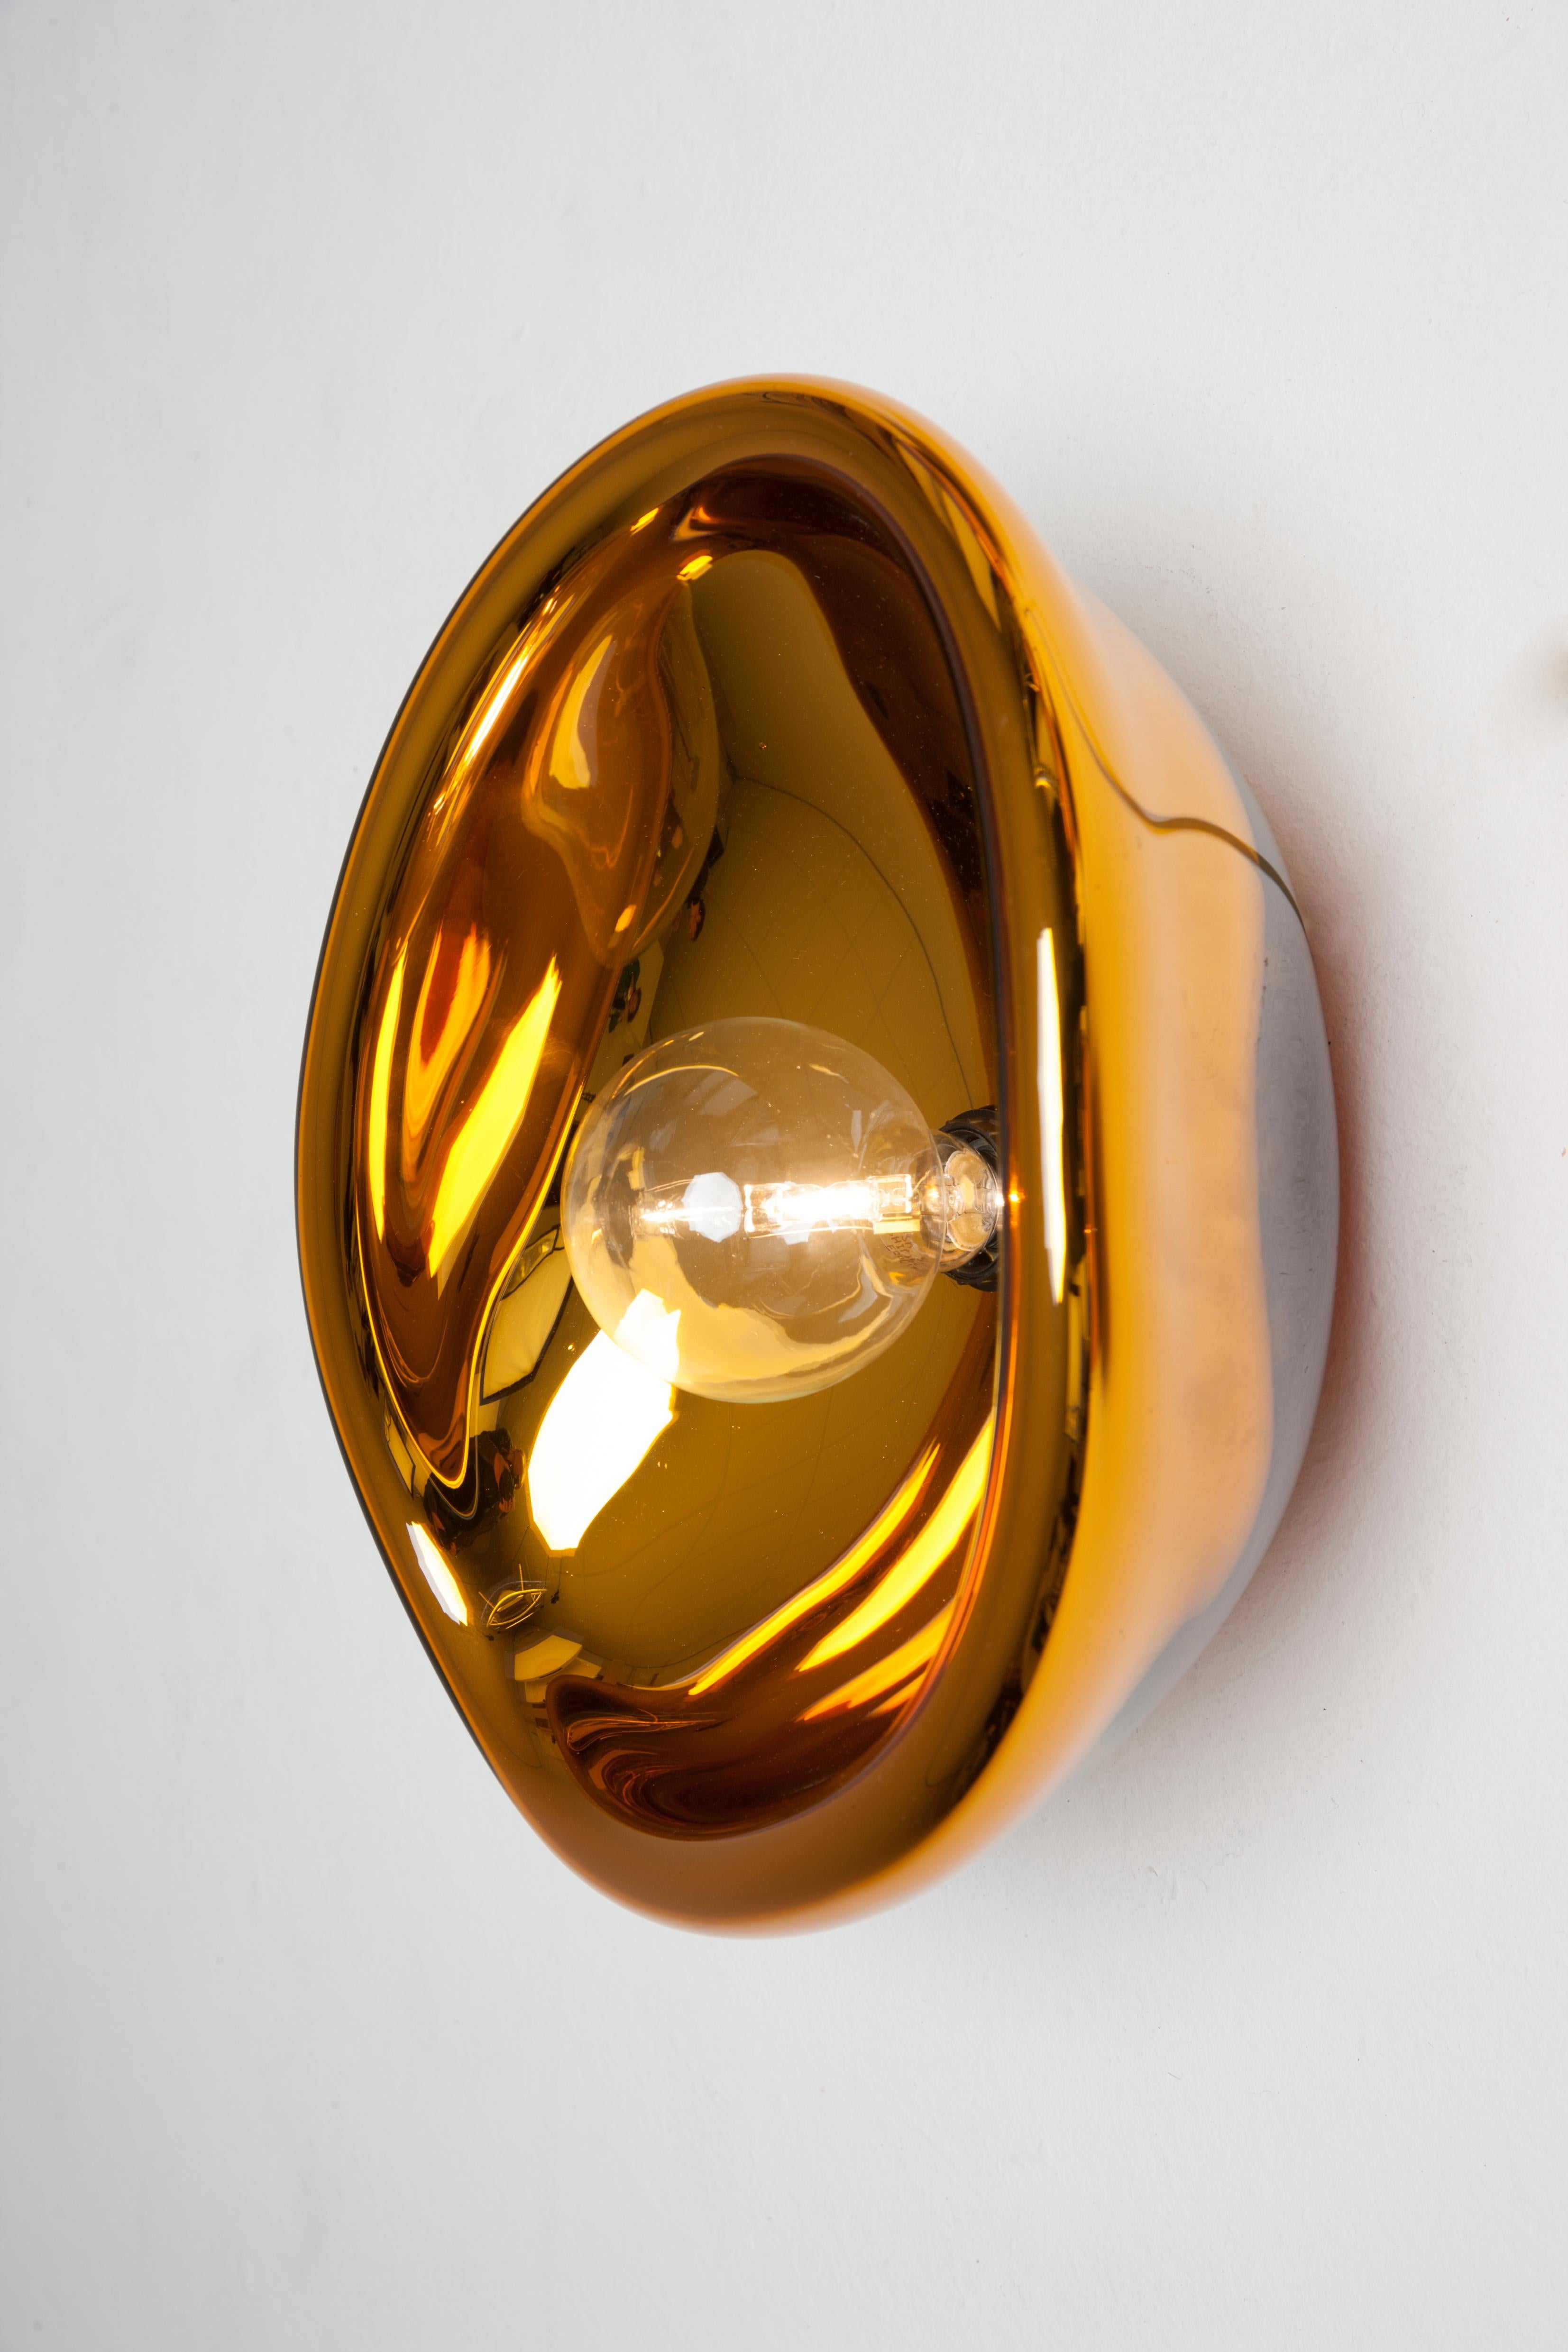 Big Aurum gold glass sconces, Alex de Witte
Unique
Dimensions: D 30 x H 40 cm.
Materials: Mouth bown glass.
It can be purchased as an ensemble or individual, in different dimensions and colors.

Aurum shows how Alex de Wite is able to convey